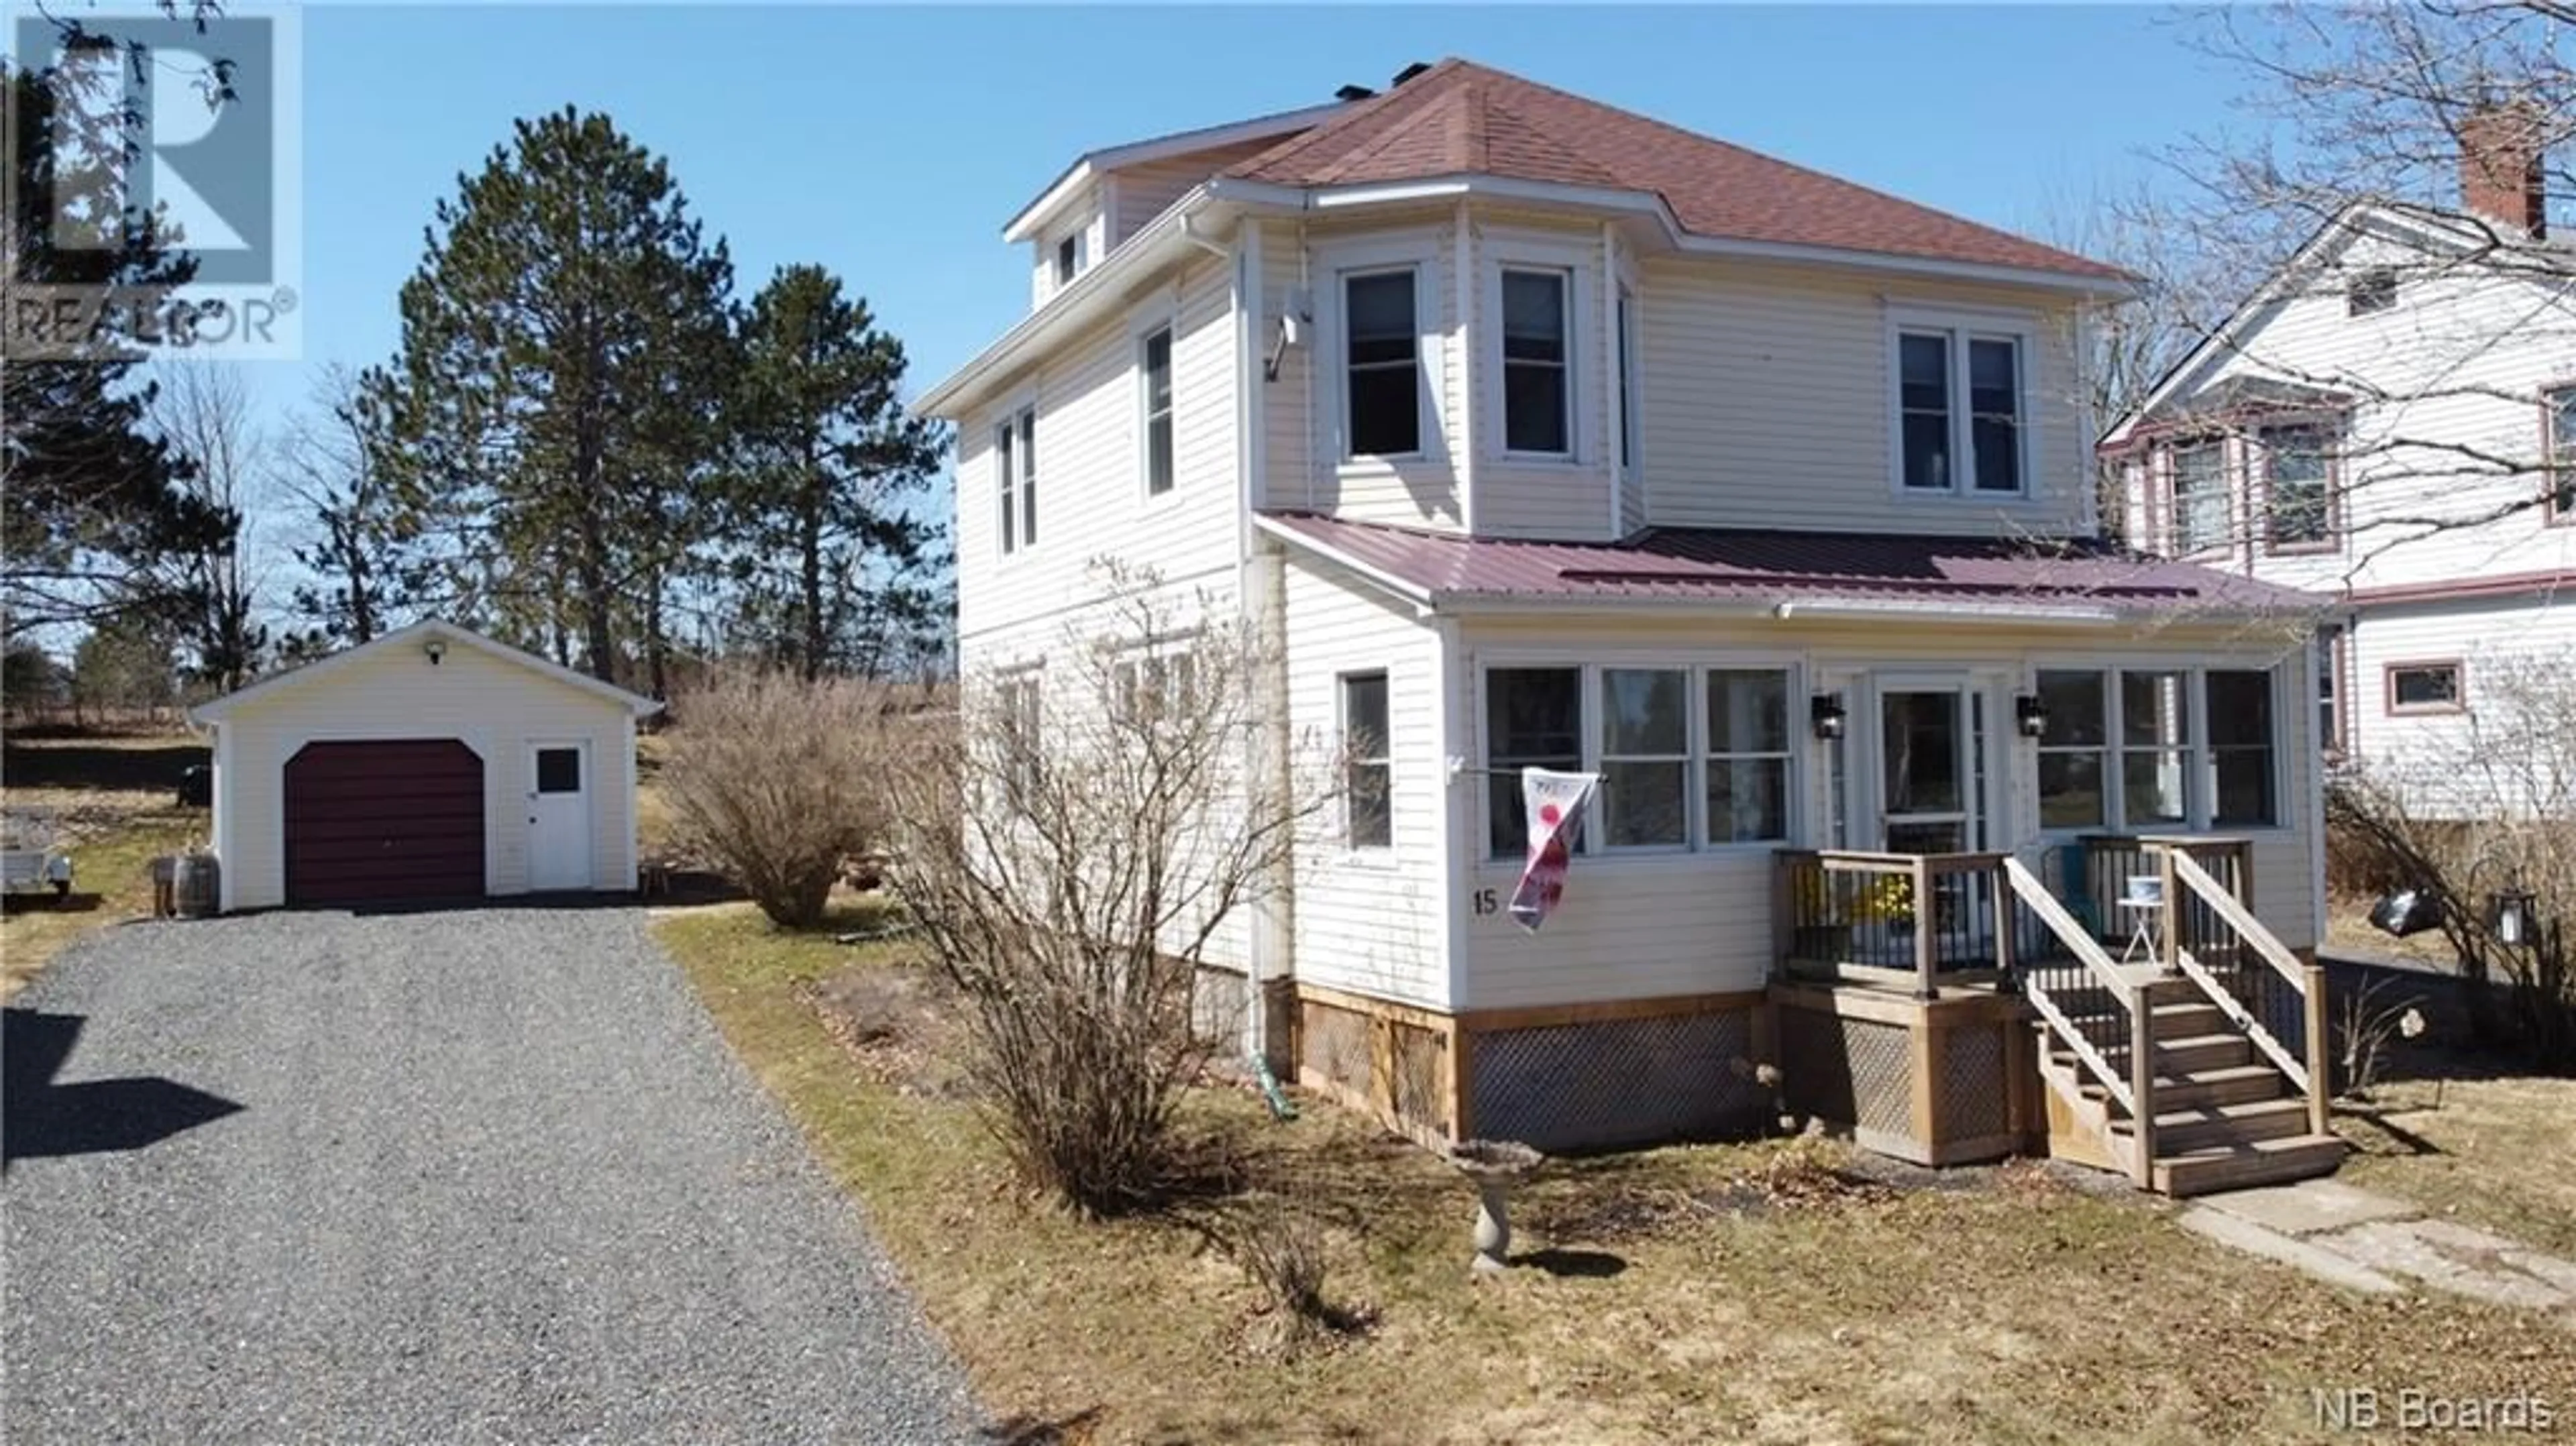 Home with unknown exterior material for 15 Tilley Road, Gagetown New Brunswick E5M1A6